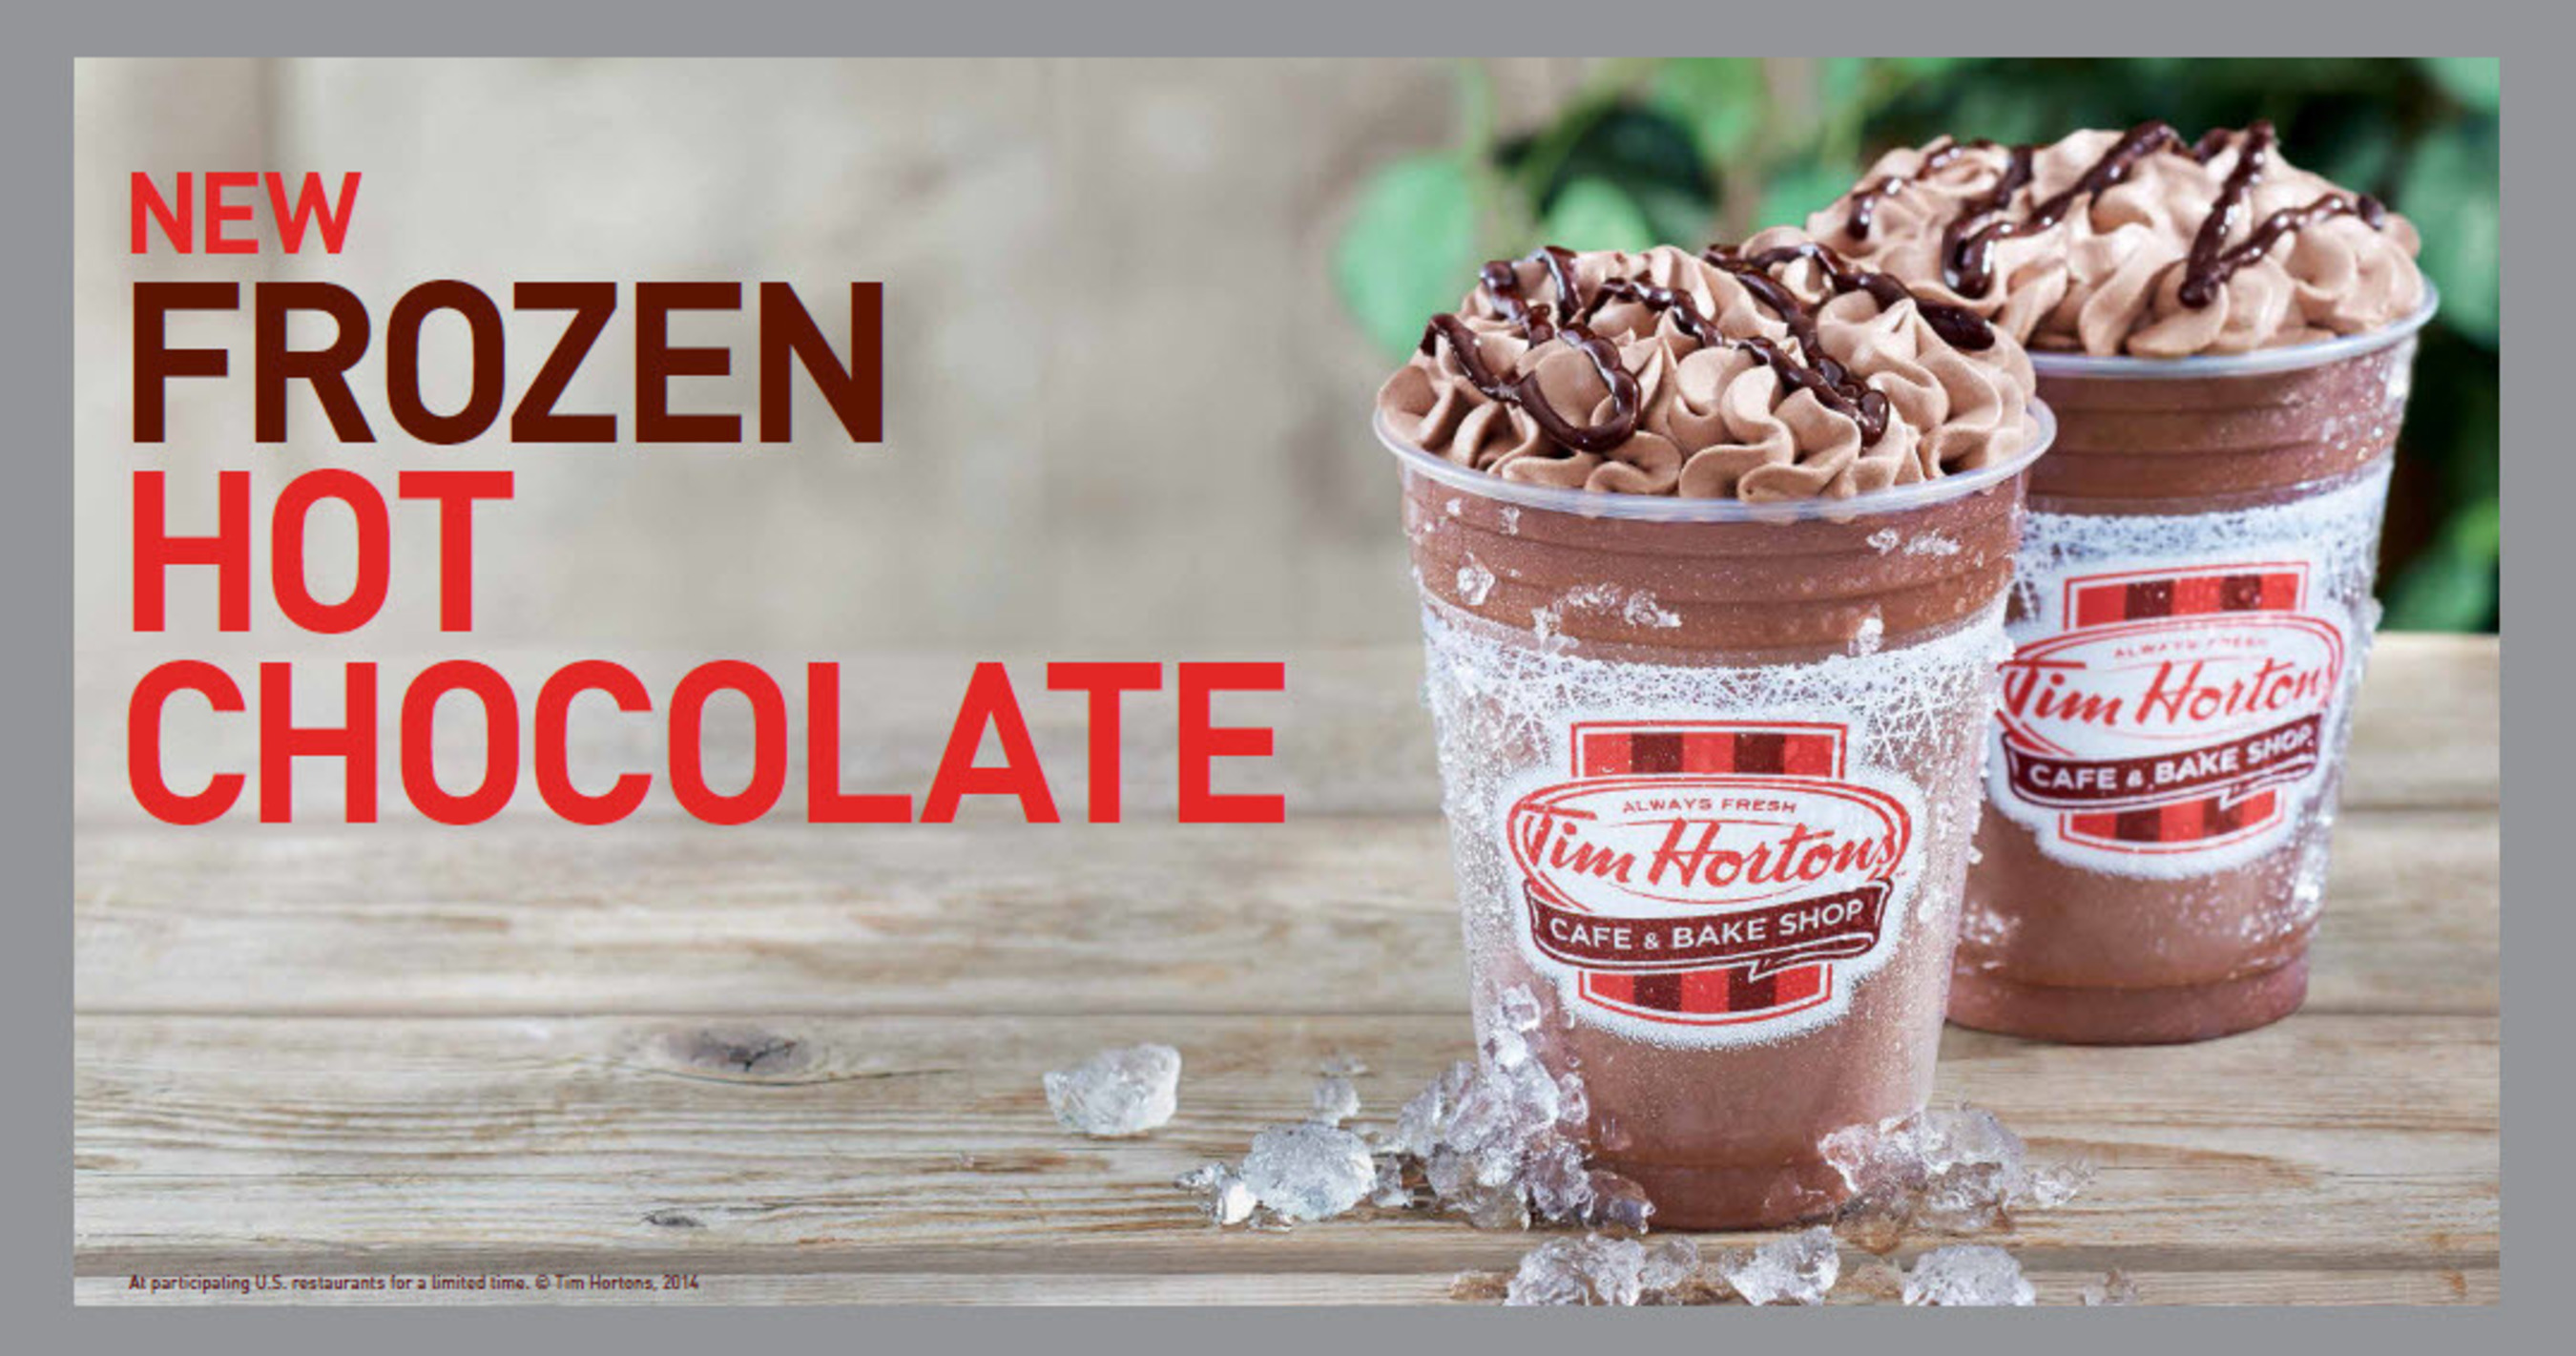 Tim Hortons Cafe & Bake Shop has launched its official drink of summer Frozen Hot Chocolate available in U.S restaurants. (PRNewsFoto/Tim Hortons)